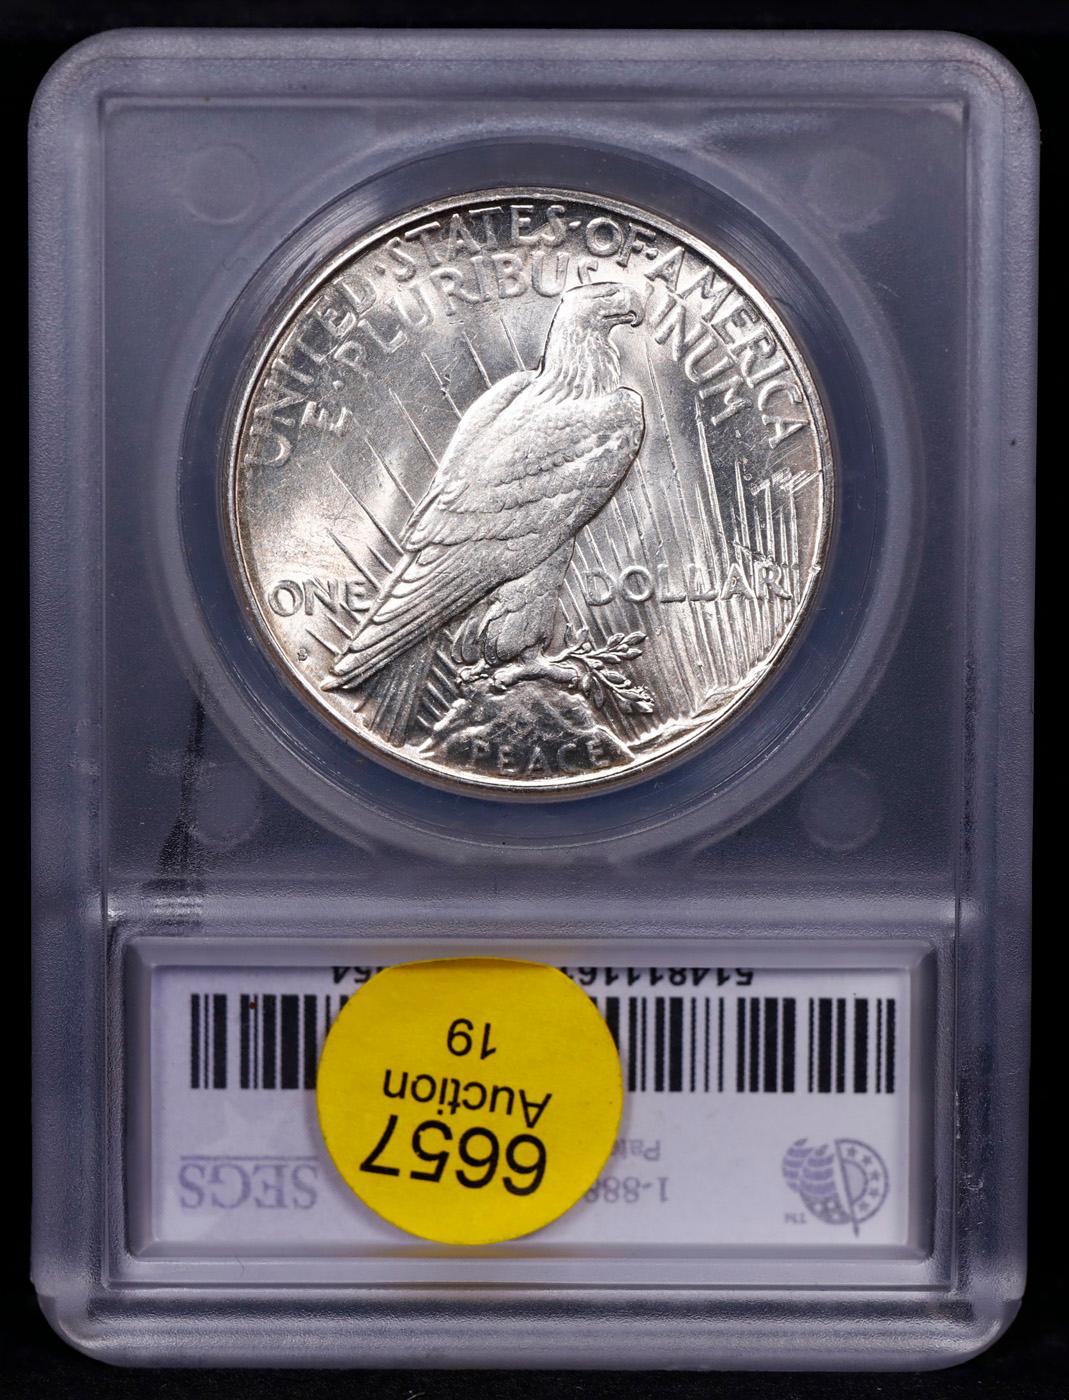 ***Auction Highlight*** 1924-s Peace Dollar $1 Graded ms64+ BY SEGS (fc)